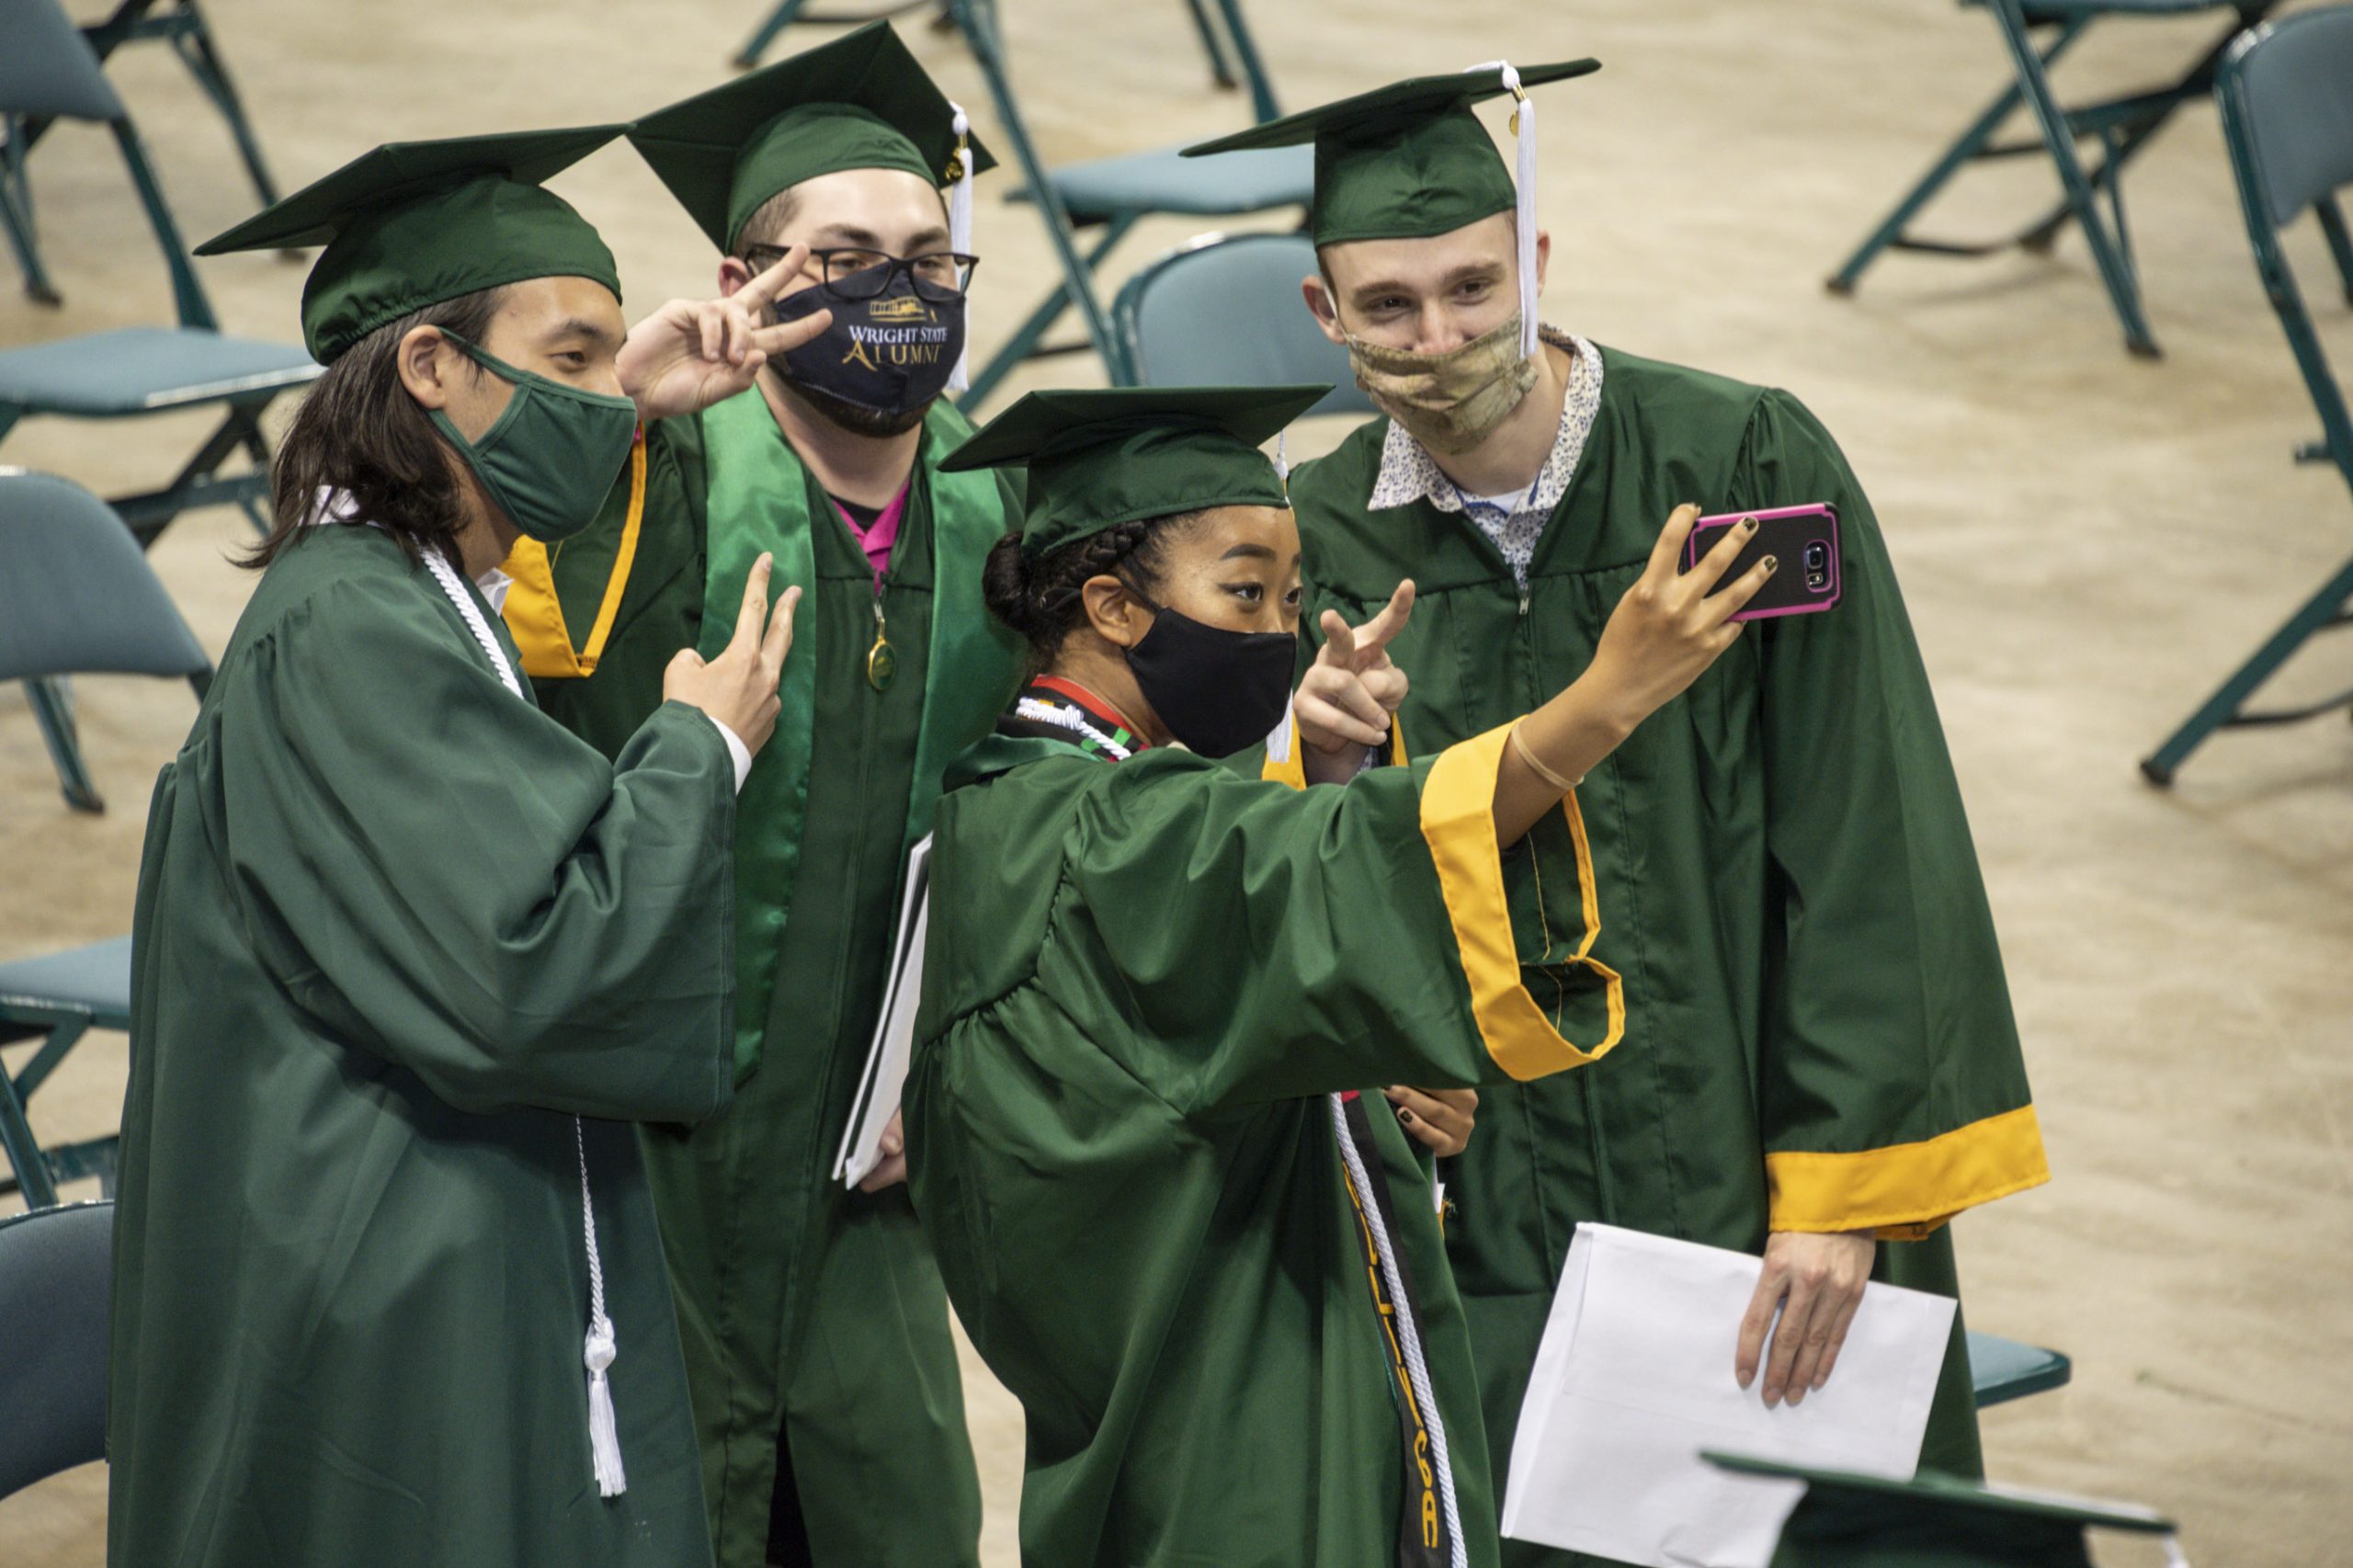 Wright State graduation 1,700 to graduate this weekend